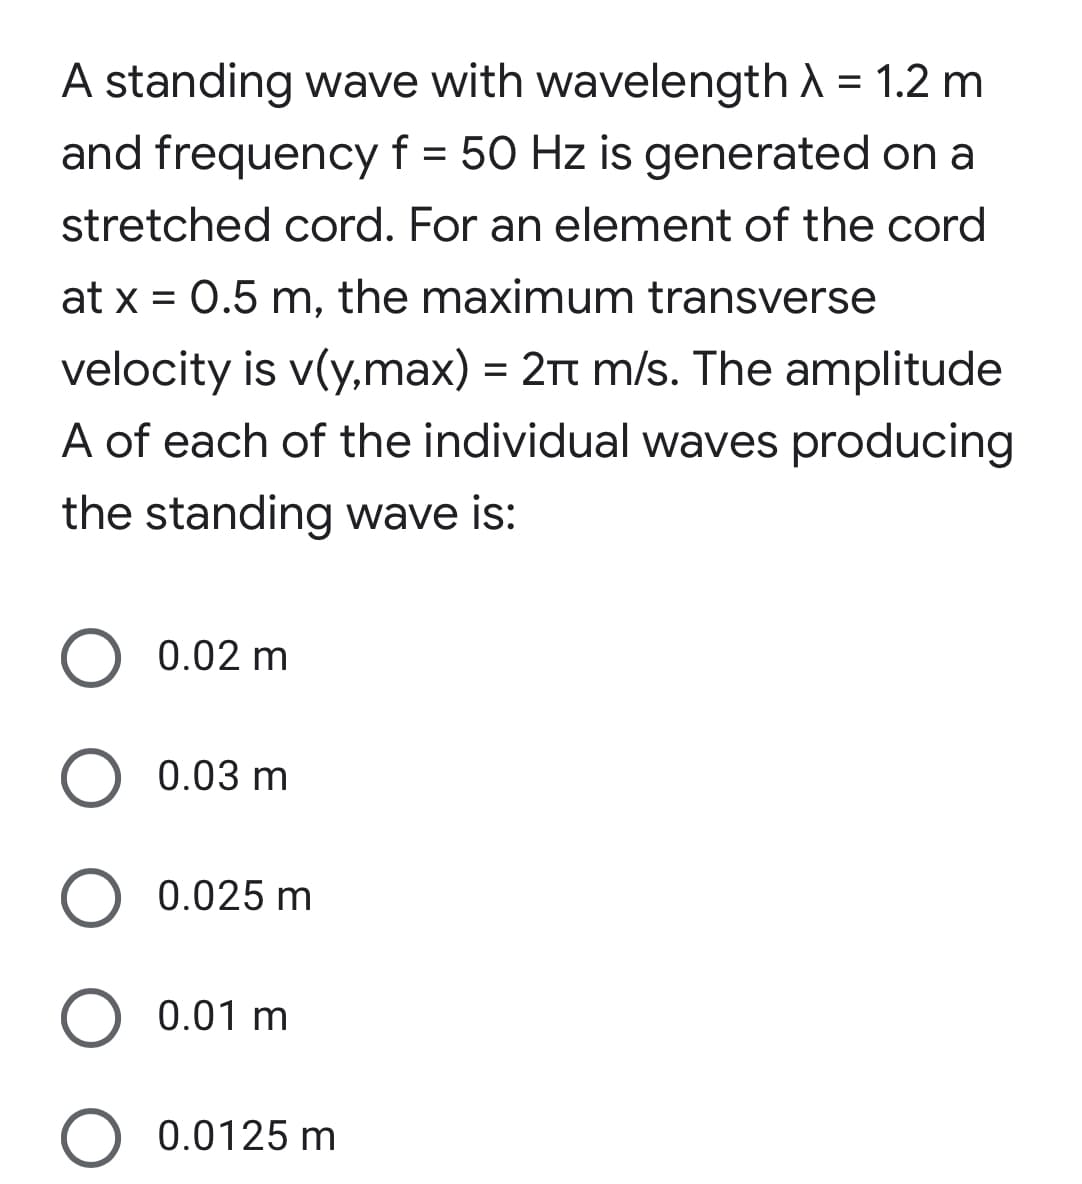 A standing wave with wavelength A = 1.2 m
and frequency f = 50 Hz is generated on a
stretched cord. For an element of the cord
at x = 0.5 m, the maximum transverse
velocity is v(y,max) = 21t m/s. The amplitude
A of each of the individual waves producing
the standing wave is:
O 0.02 m
O 0.03 m
0.025 m
0.01 m
O 0.0125 m
